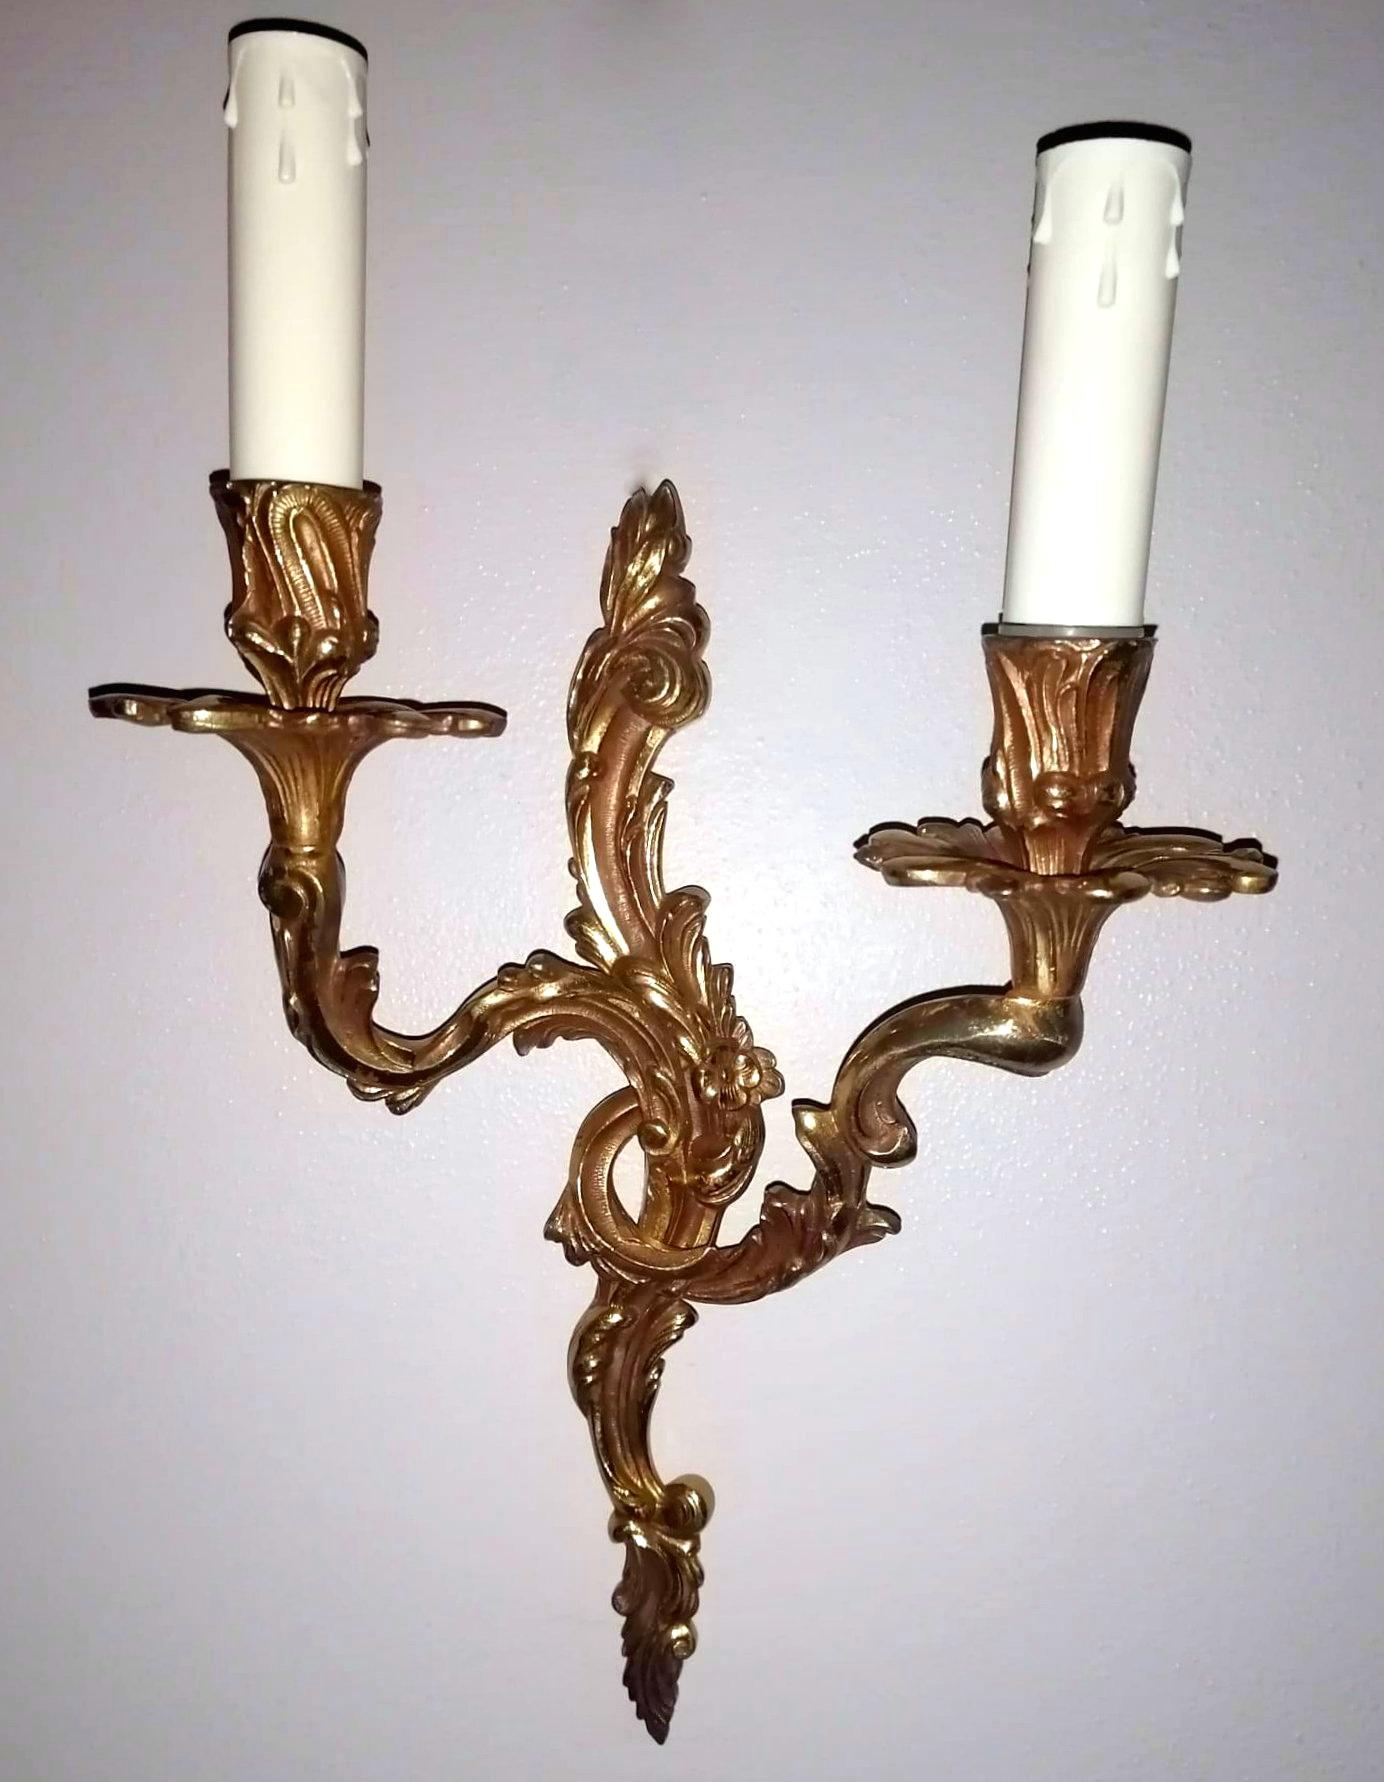 Louis XVI Style Pair of French Wall Sconces in Gilded and Chiseled Bronze In Good Condition For Sale In Prato, Tuscany